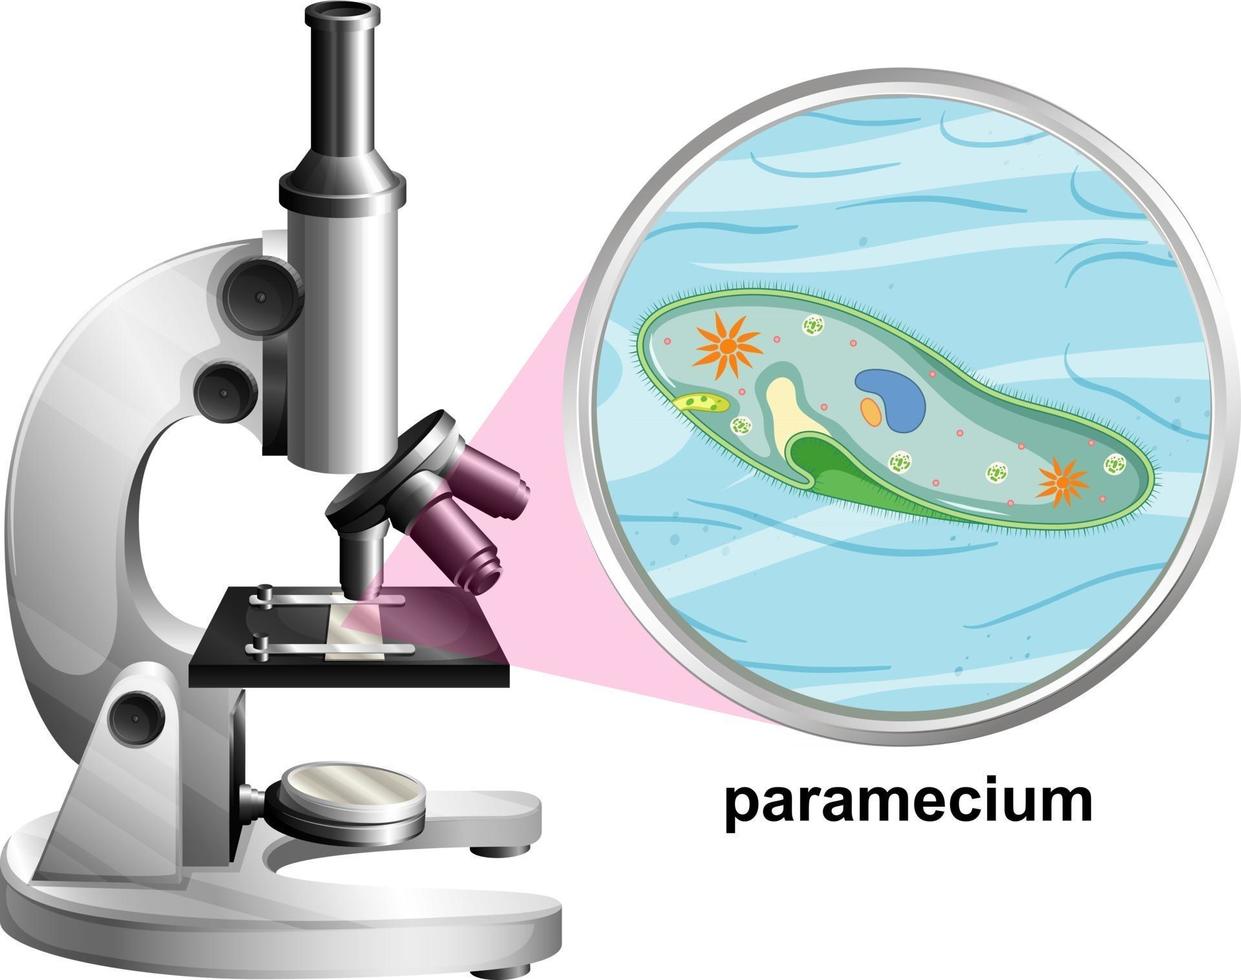 Microscope with anatomy structure of Paramecium on white background vector